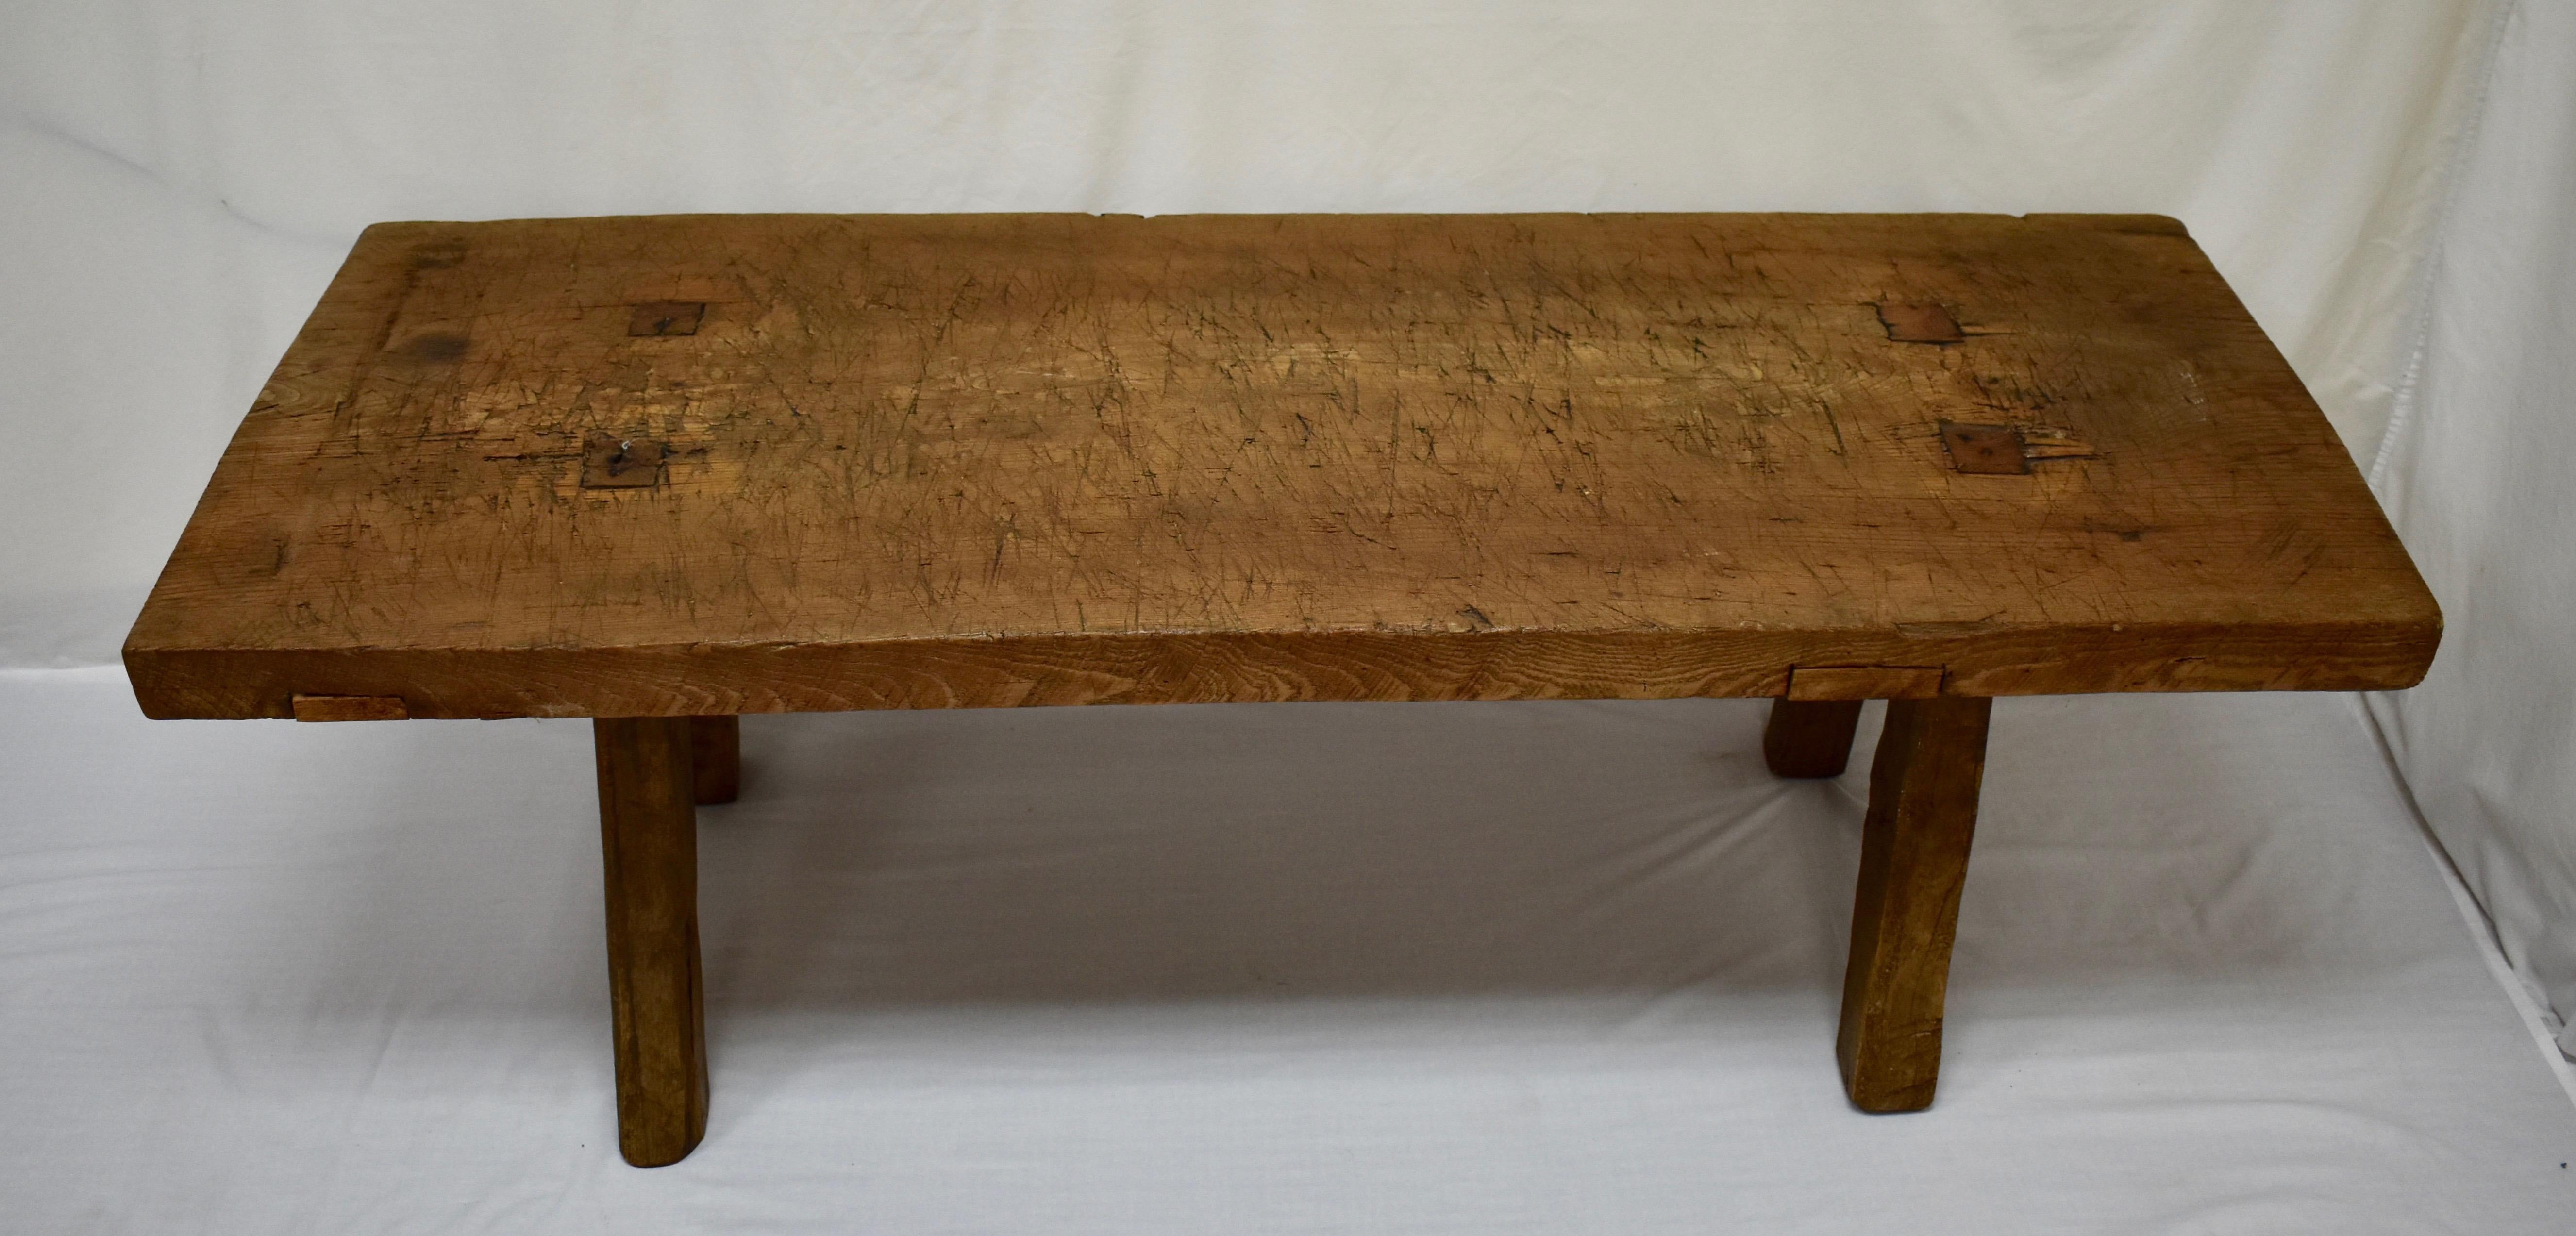 A superb oak pig bench coffee table standing on four sturdy, splayed, hand-hewn legs, which are through-tenoned and wedged into the underside of the top. The top itself is a single oak slab 2.5” thick, which is chopped, scratched and gnarled through